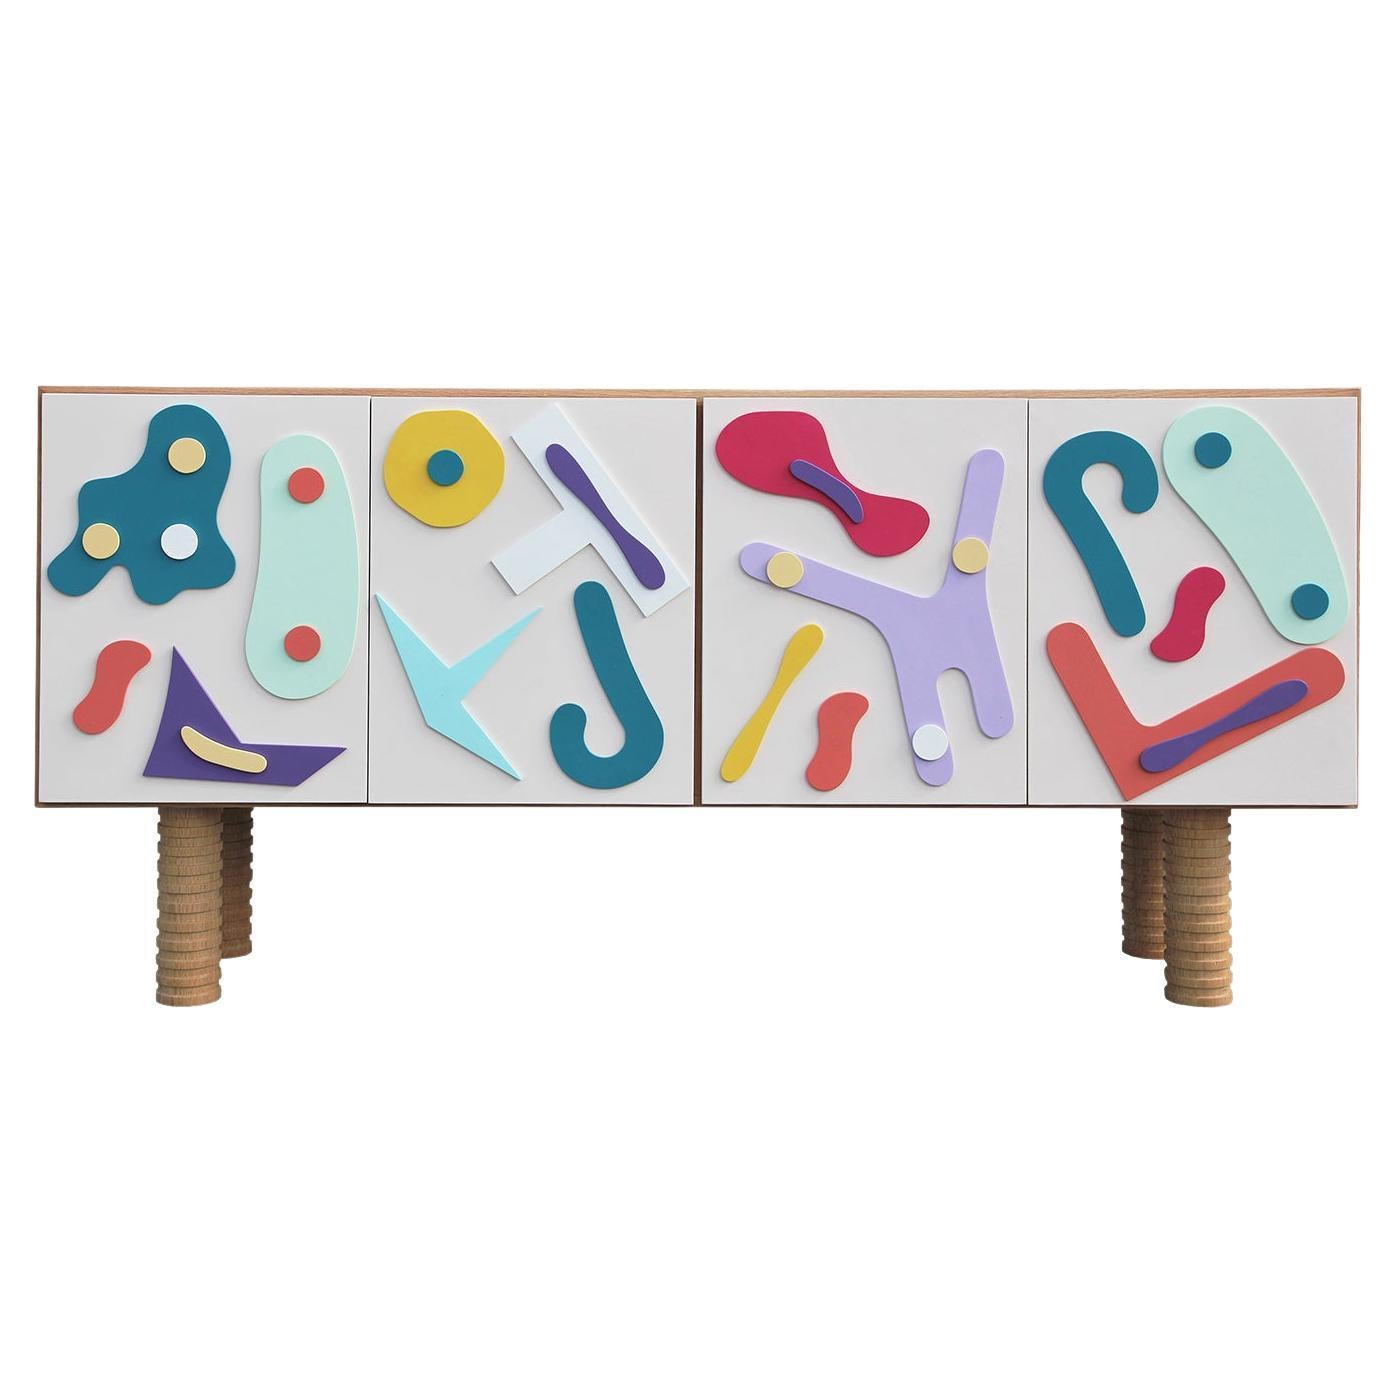 Biomorphic Post Modern Memphis Style Colorful Pastel Credenza / Sideboard